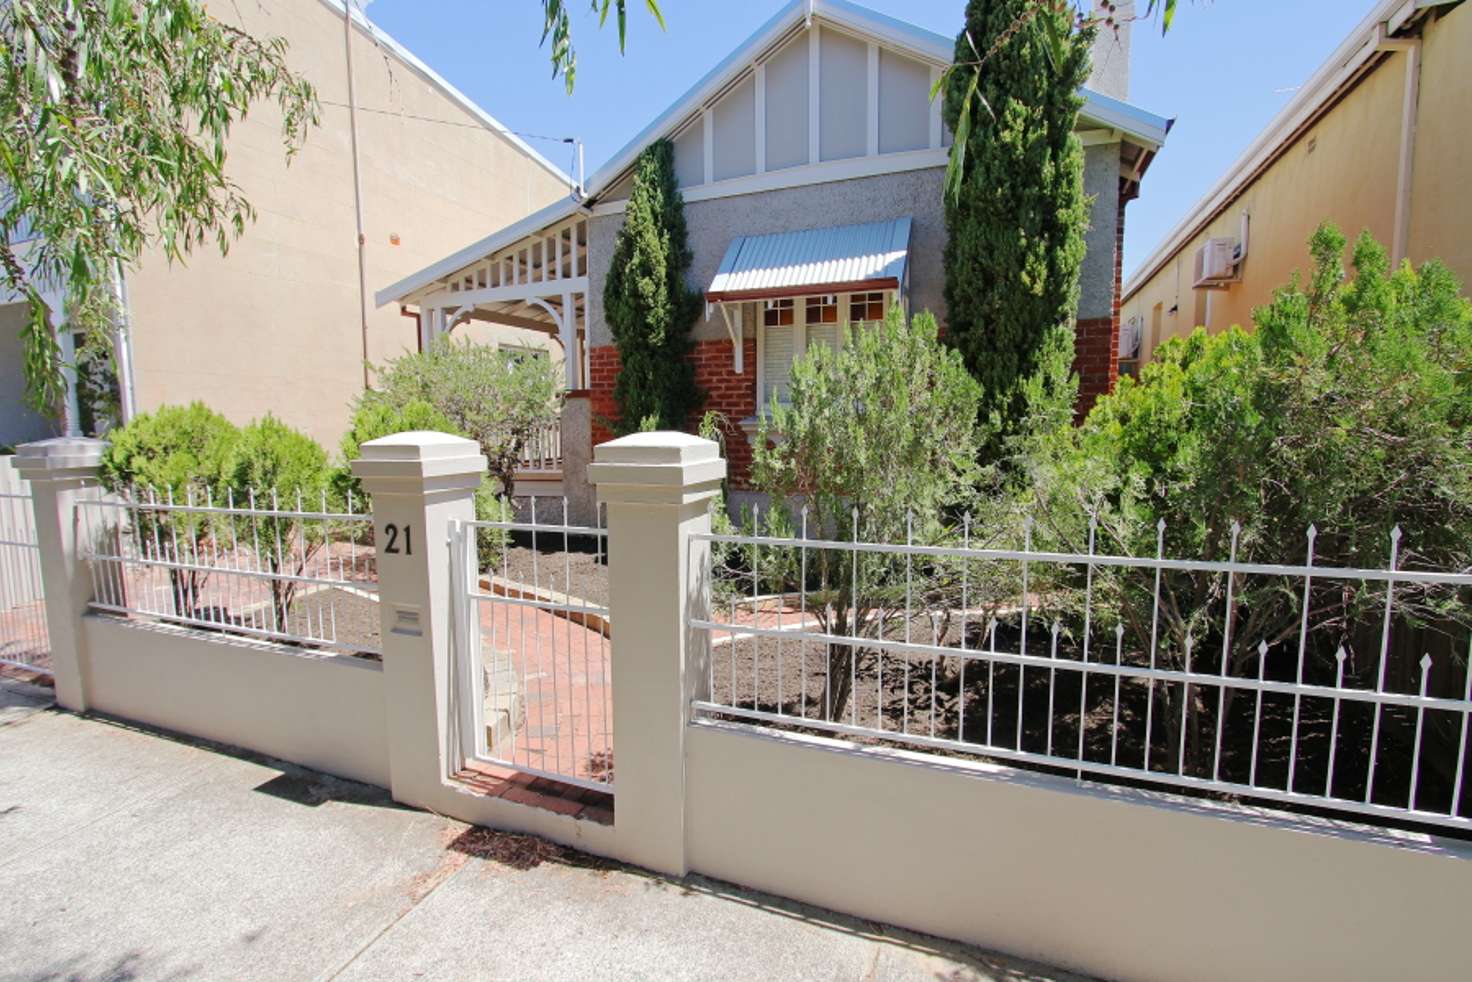 Main view of Homely house listing, 21 Cowle Street, West Perth WA 6005